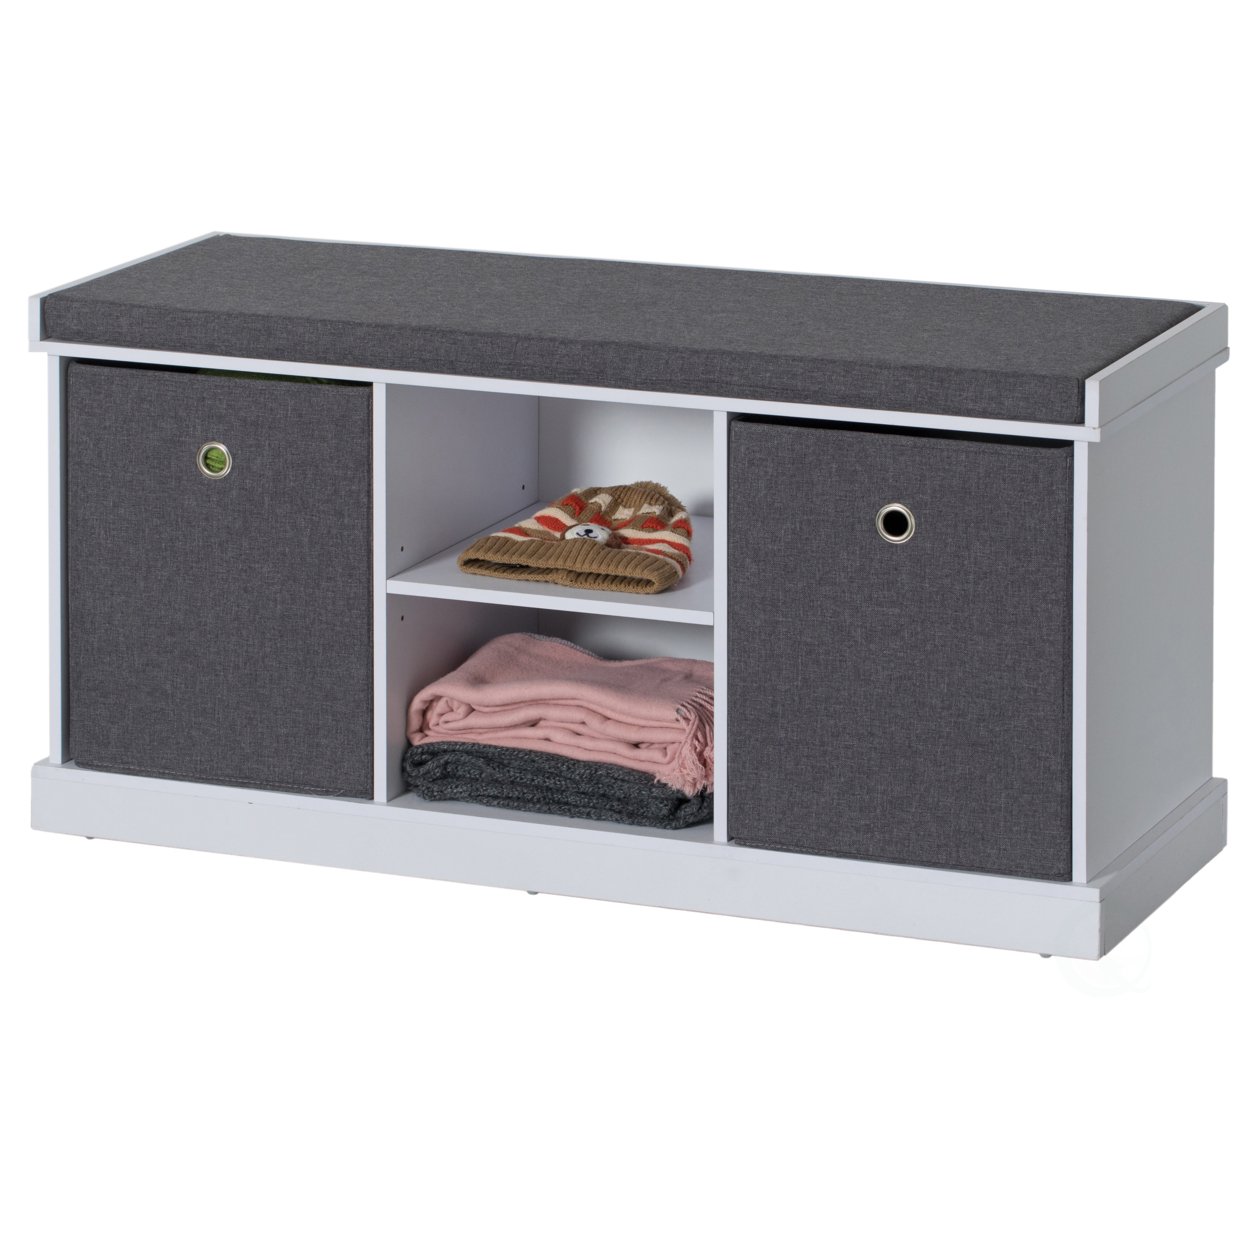 MDF Storage Box Shoe Bench with 2 Drawers, Foldable Baskets and a Gray Cushion, White